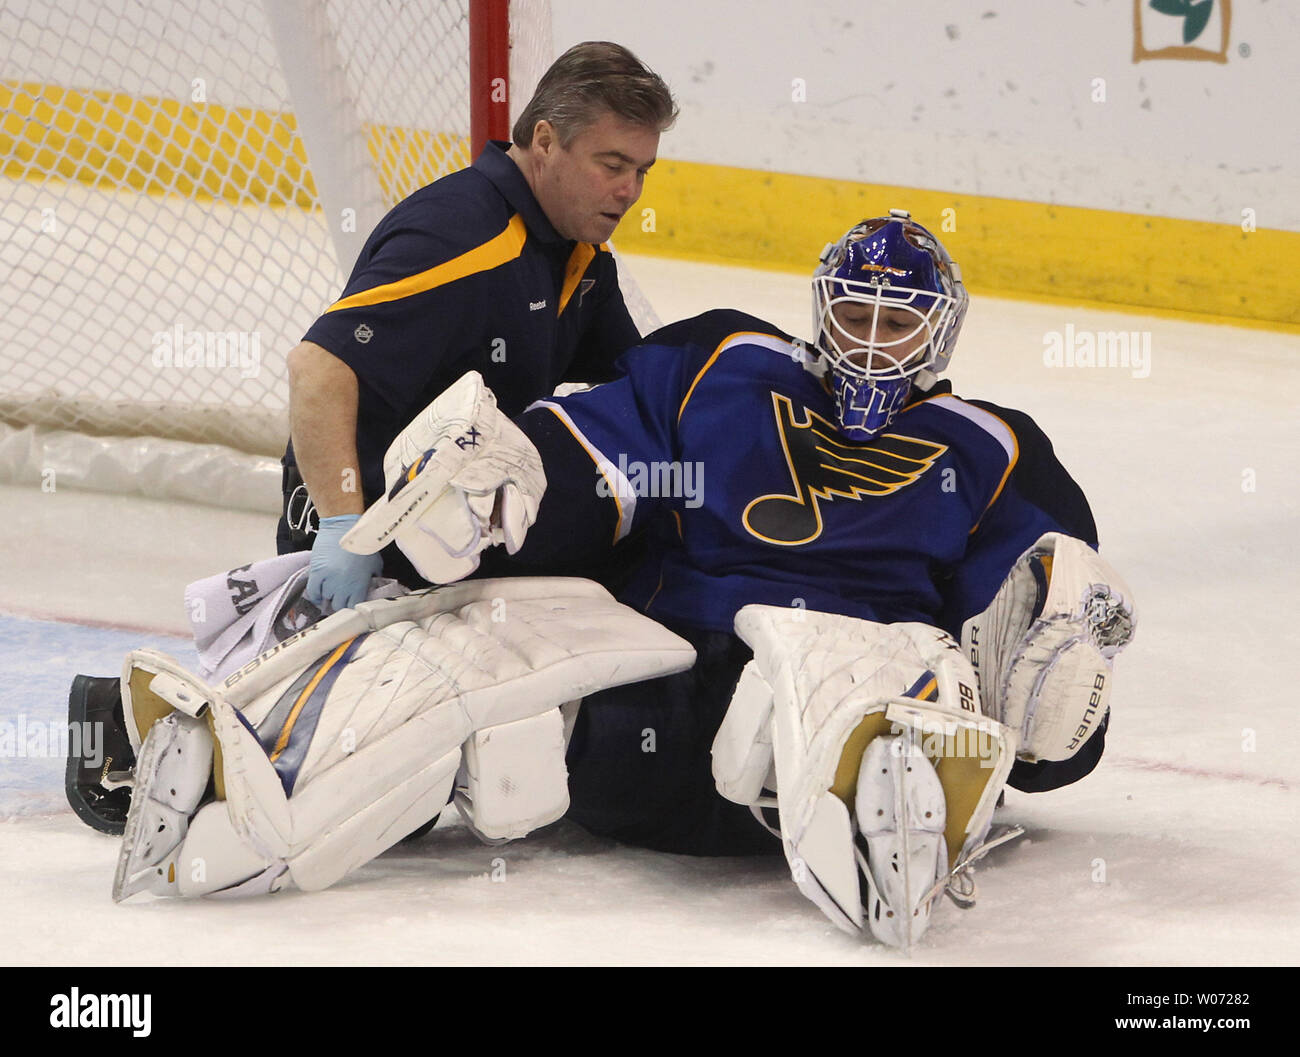 St. Louis Blues trainer Ray Barile helps goaltender Brian Elliott back up after Detroit Red Wings Justin Abedlkader charged into him in the third period at the Scottrade Center in St. Louis on December 6, 2011.  St. Louis won the game 3-2.    UPI/Bill Greenblatt Stock Photo